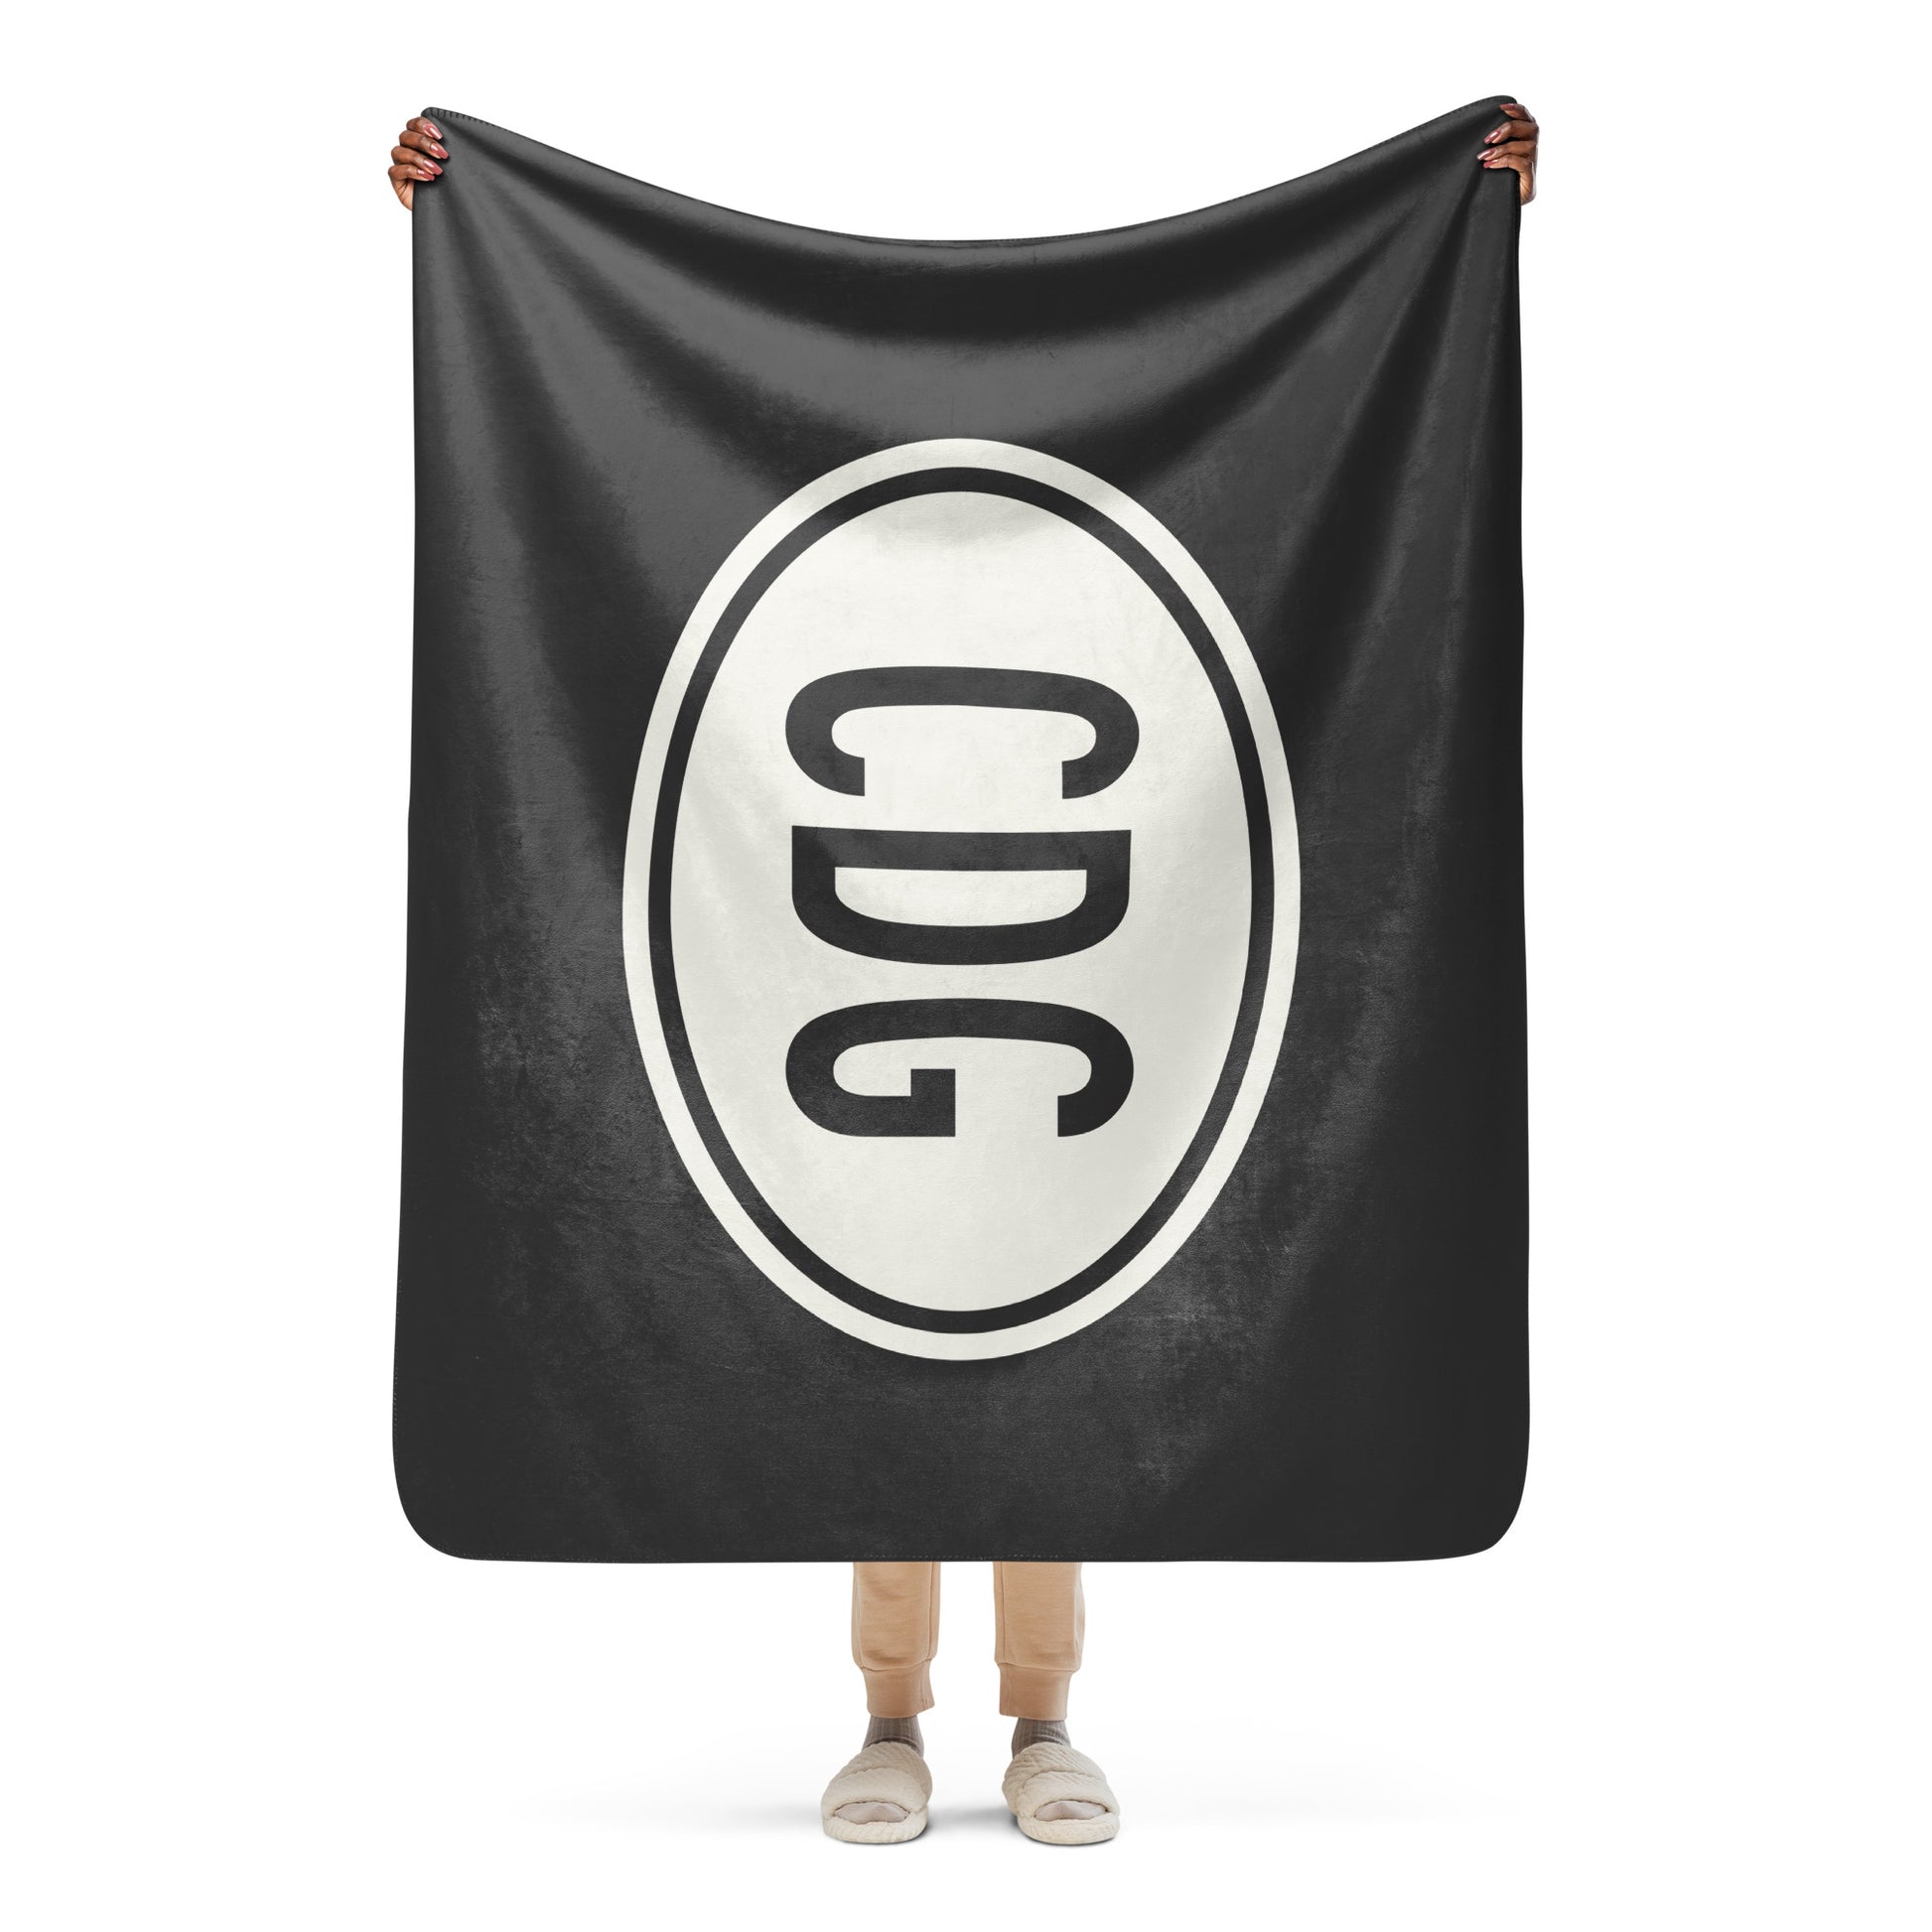 Unique Travel Gift Sherpa Blanket - White Oval • CDG Paris • YHM Designs - Image 04